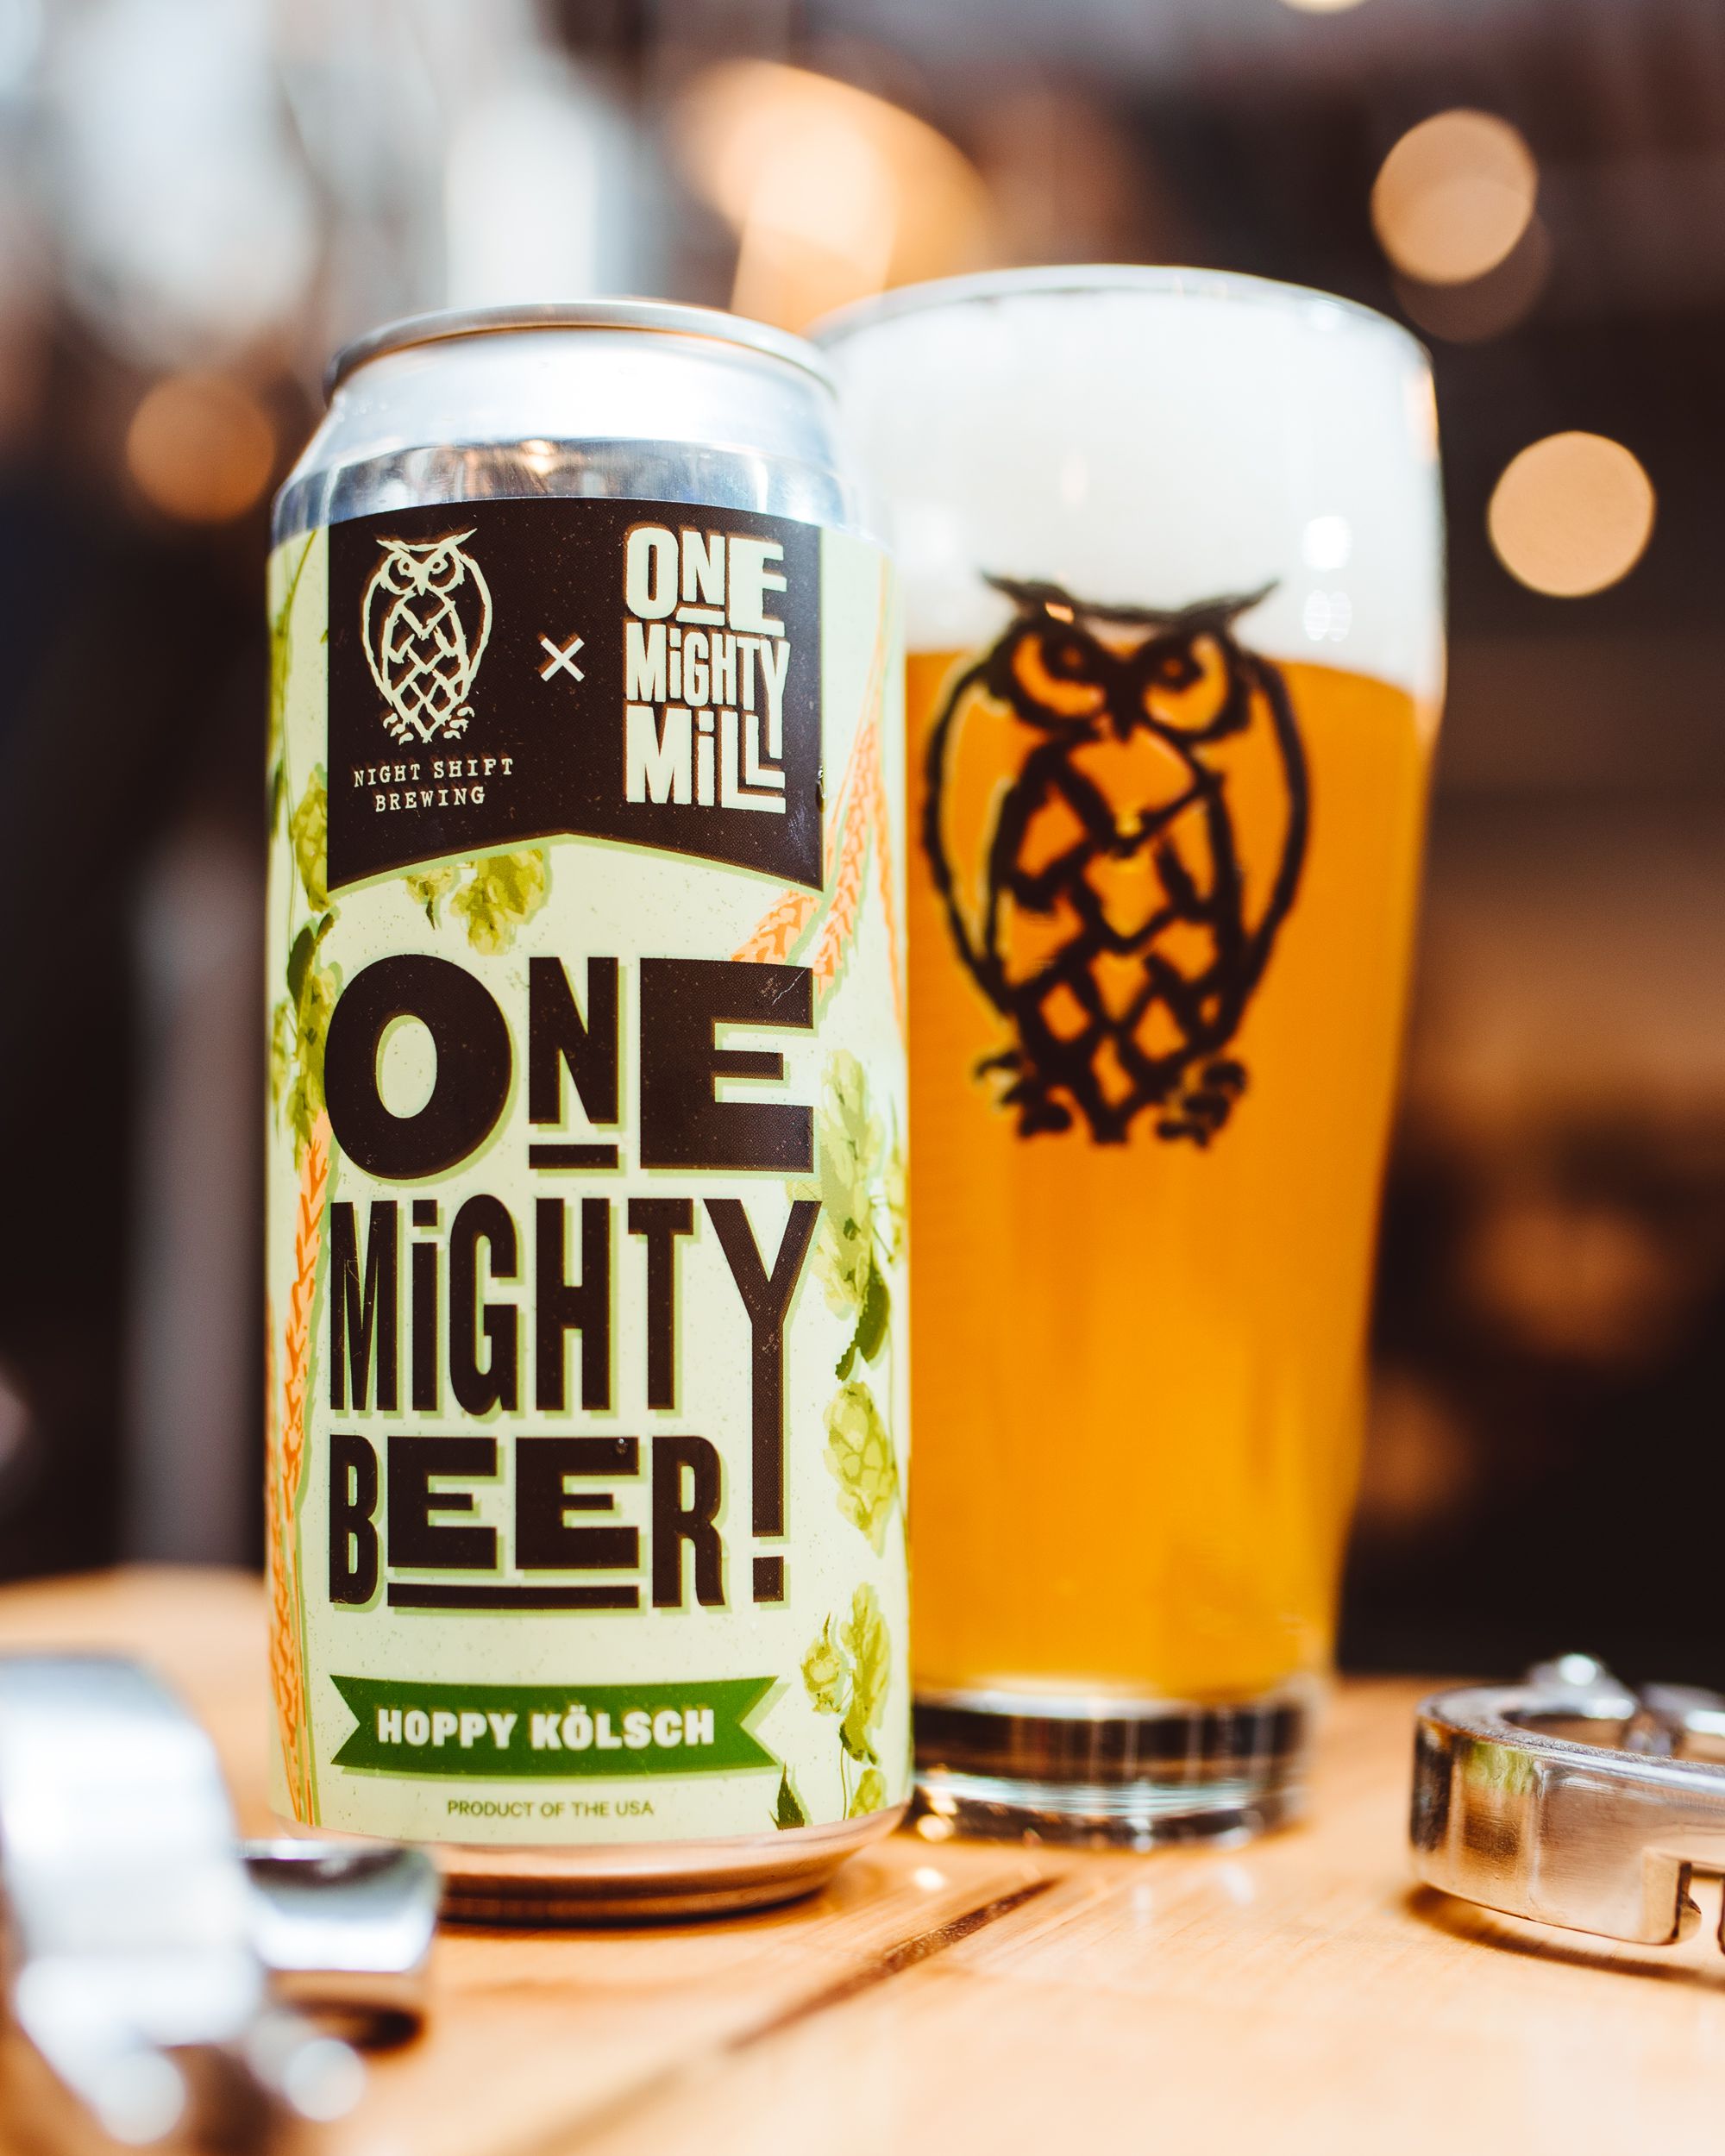 What to know about Night Shift's collaboration with One Mighty Mill